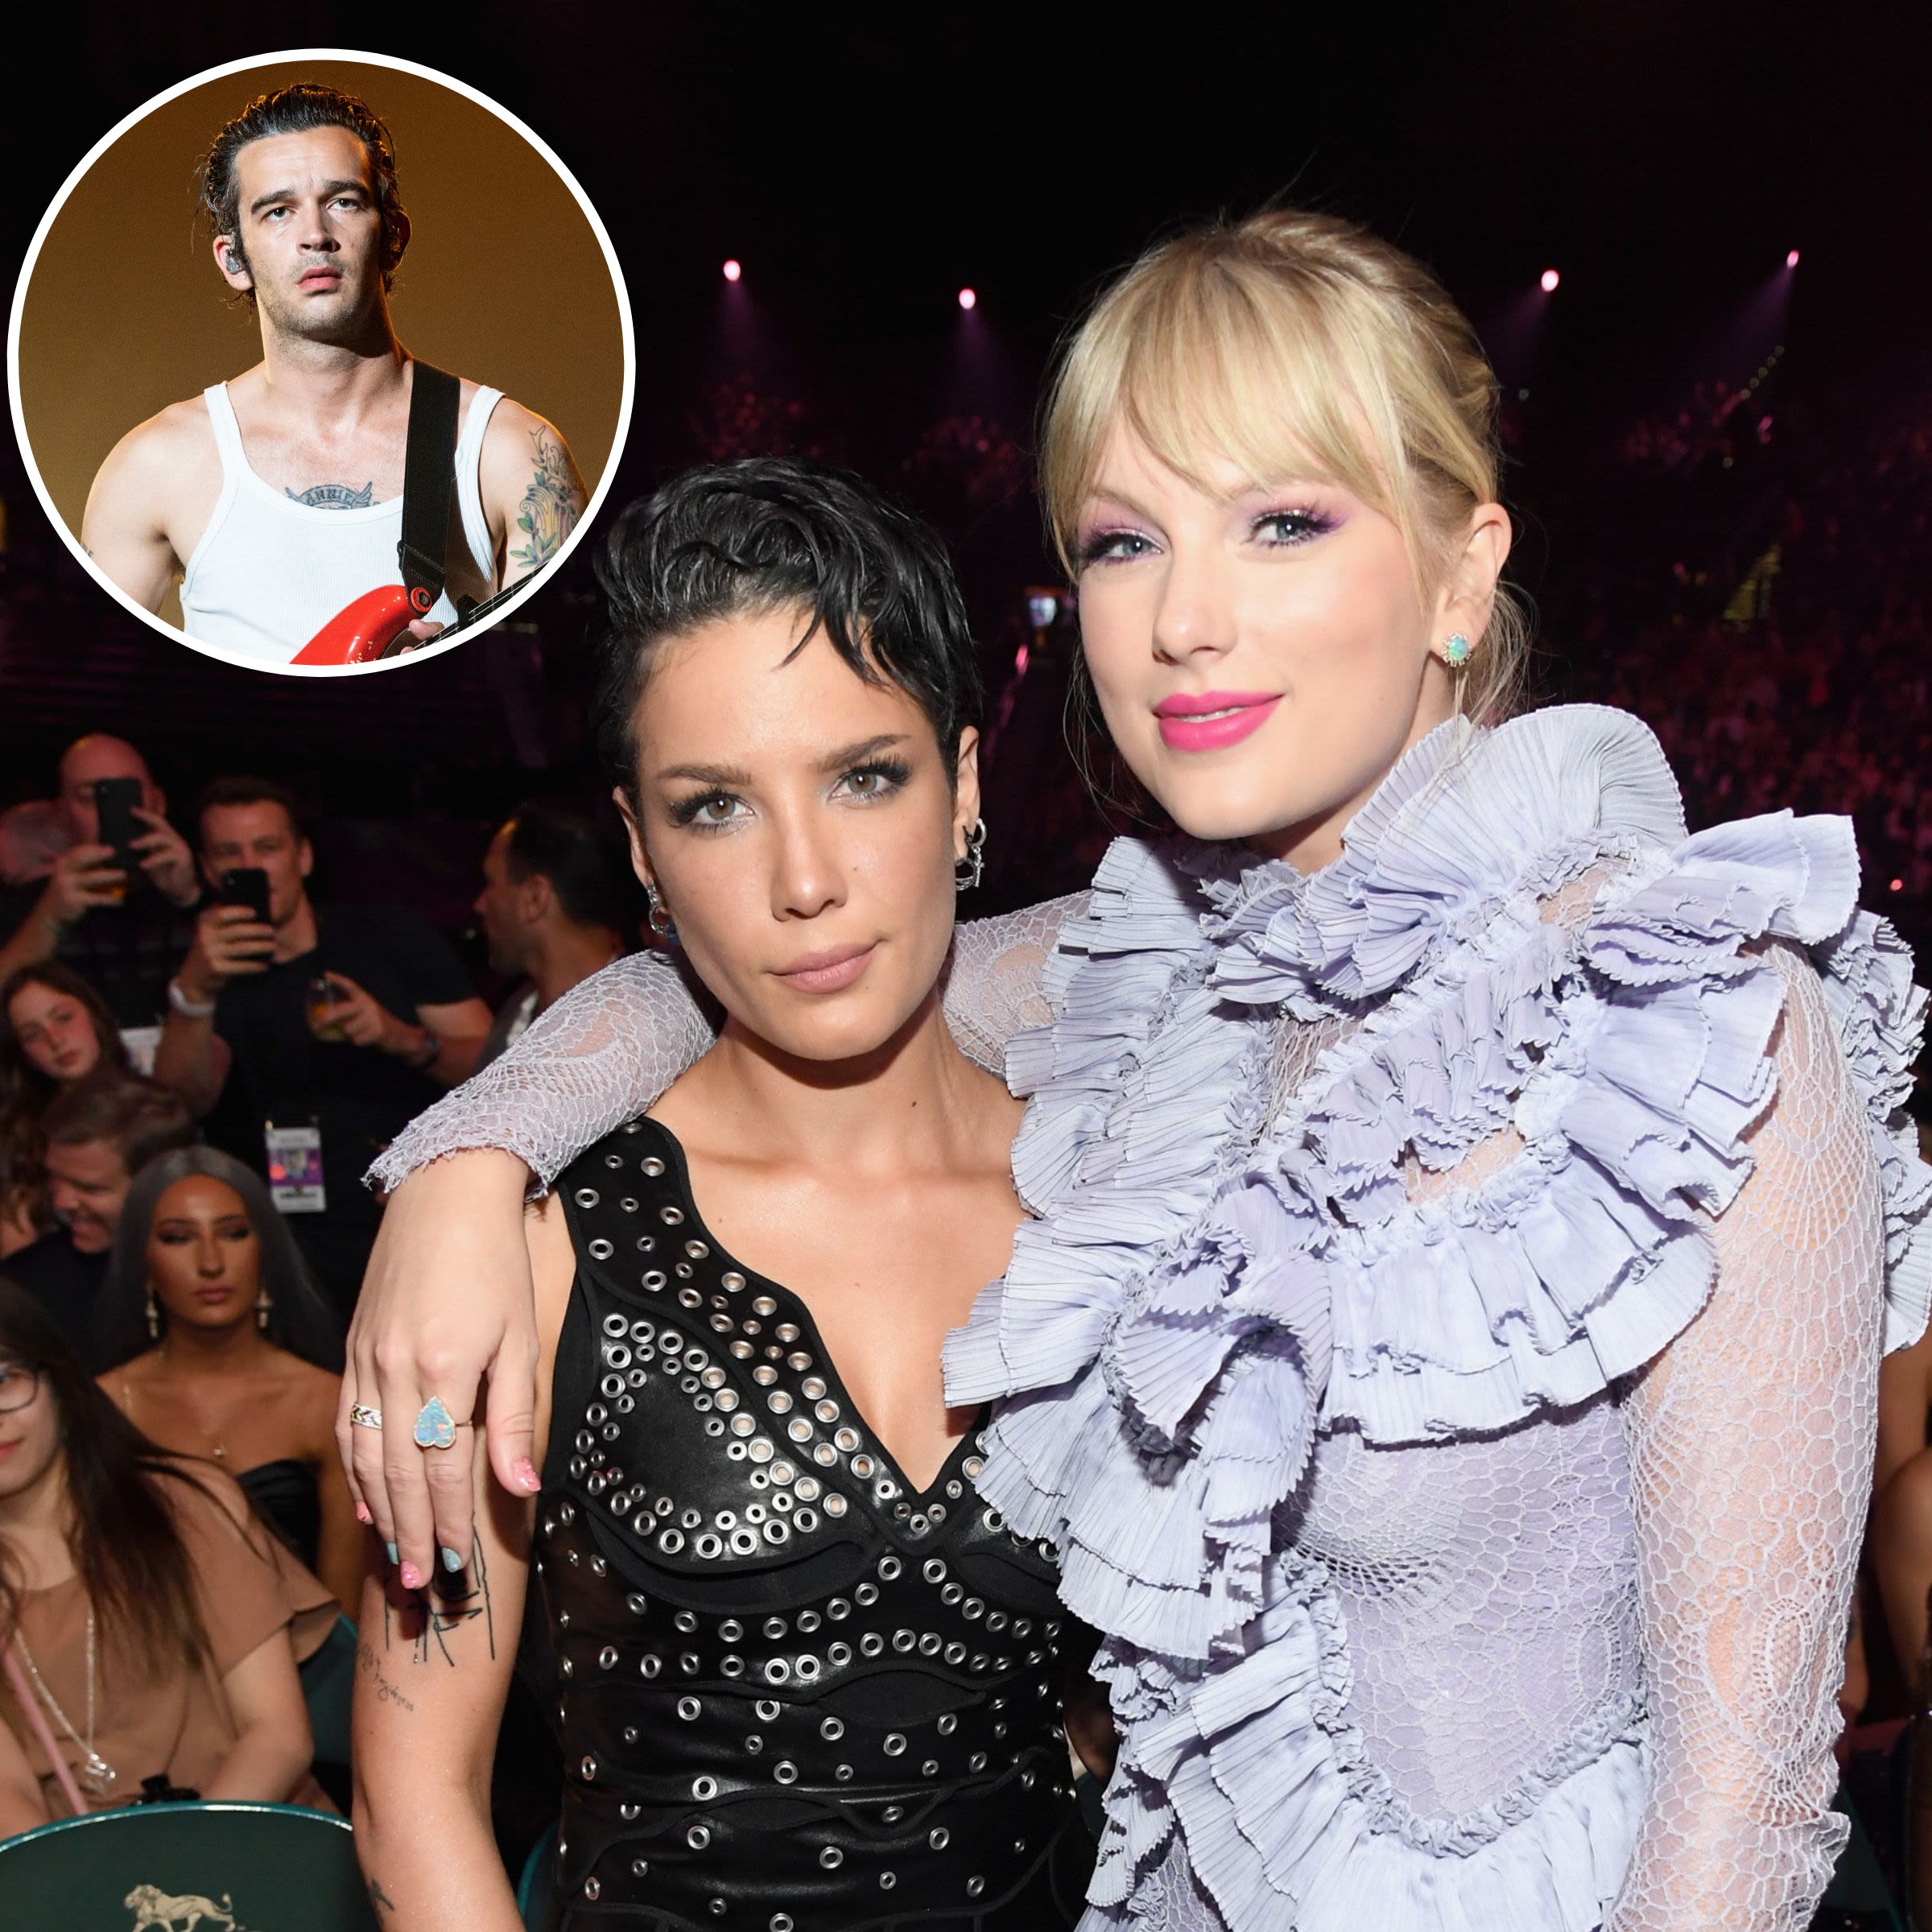 Matty Healy’s Ex Halsey Supports Taylor Swift With Shirtless Photo of Her BF in ‘TTPD’ Merch